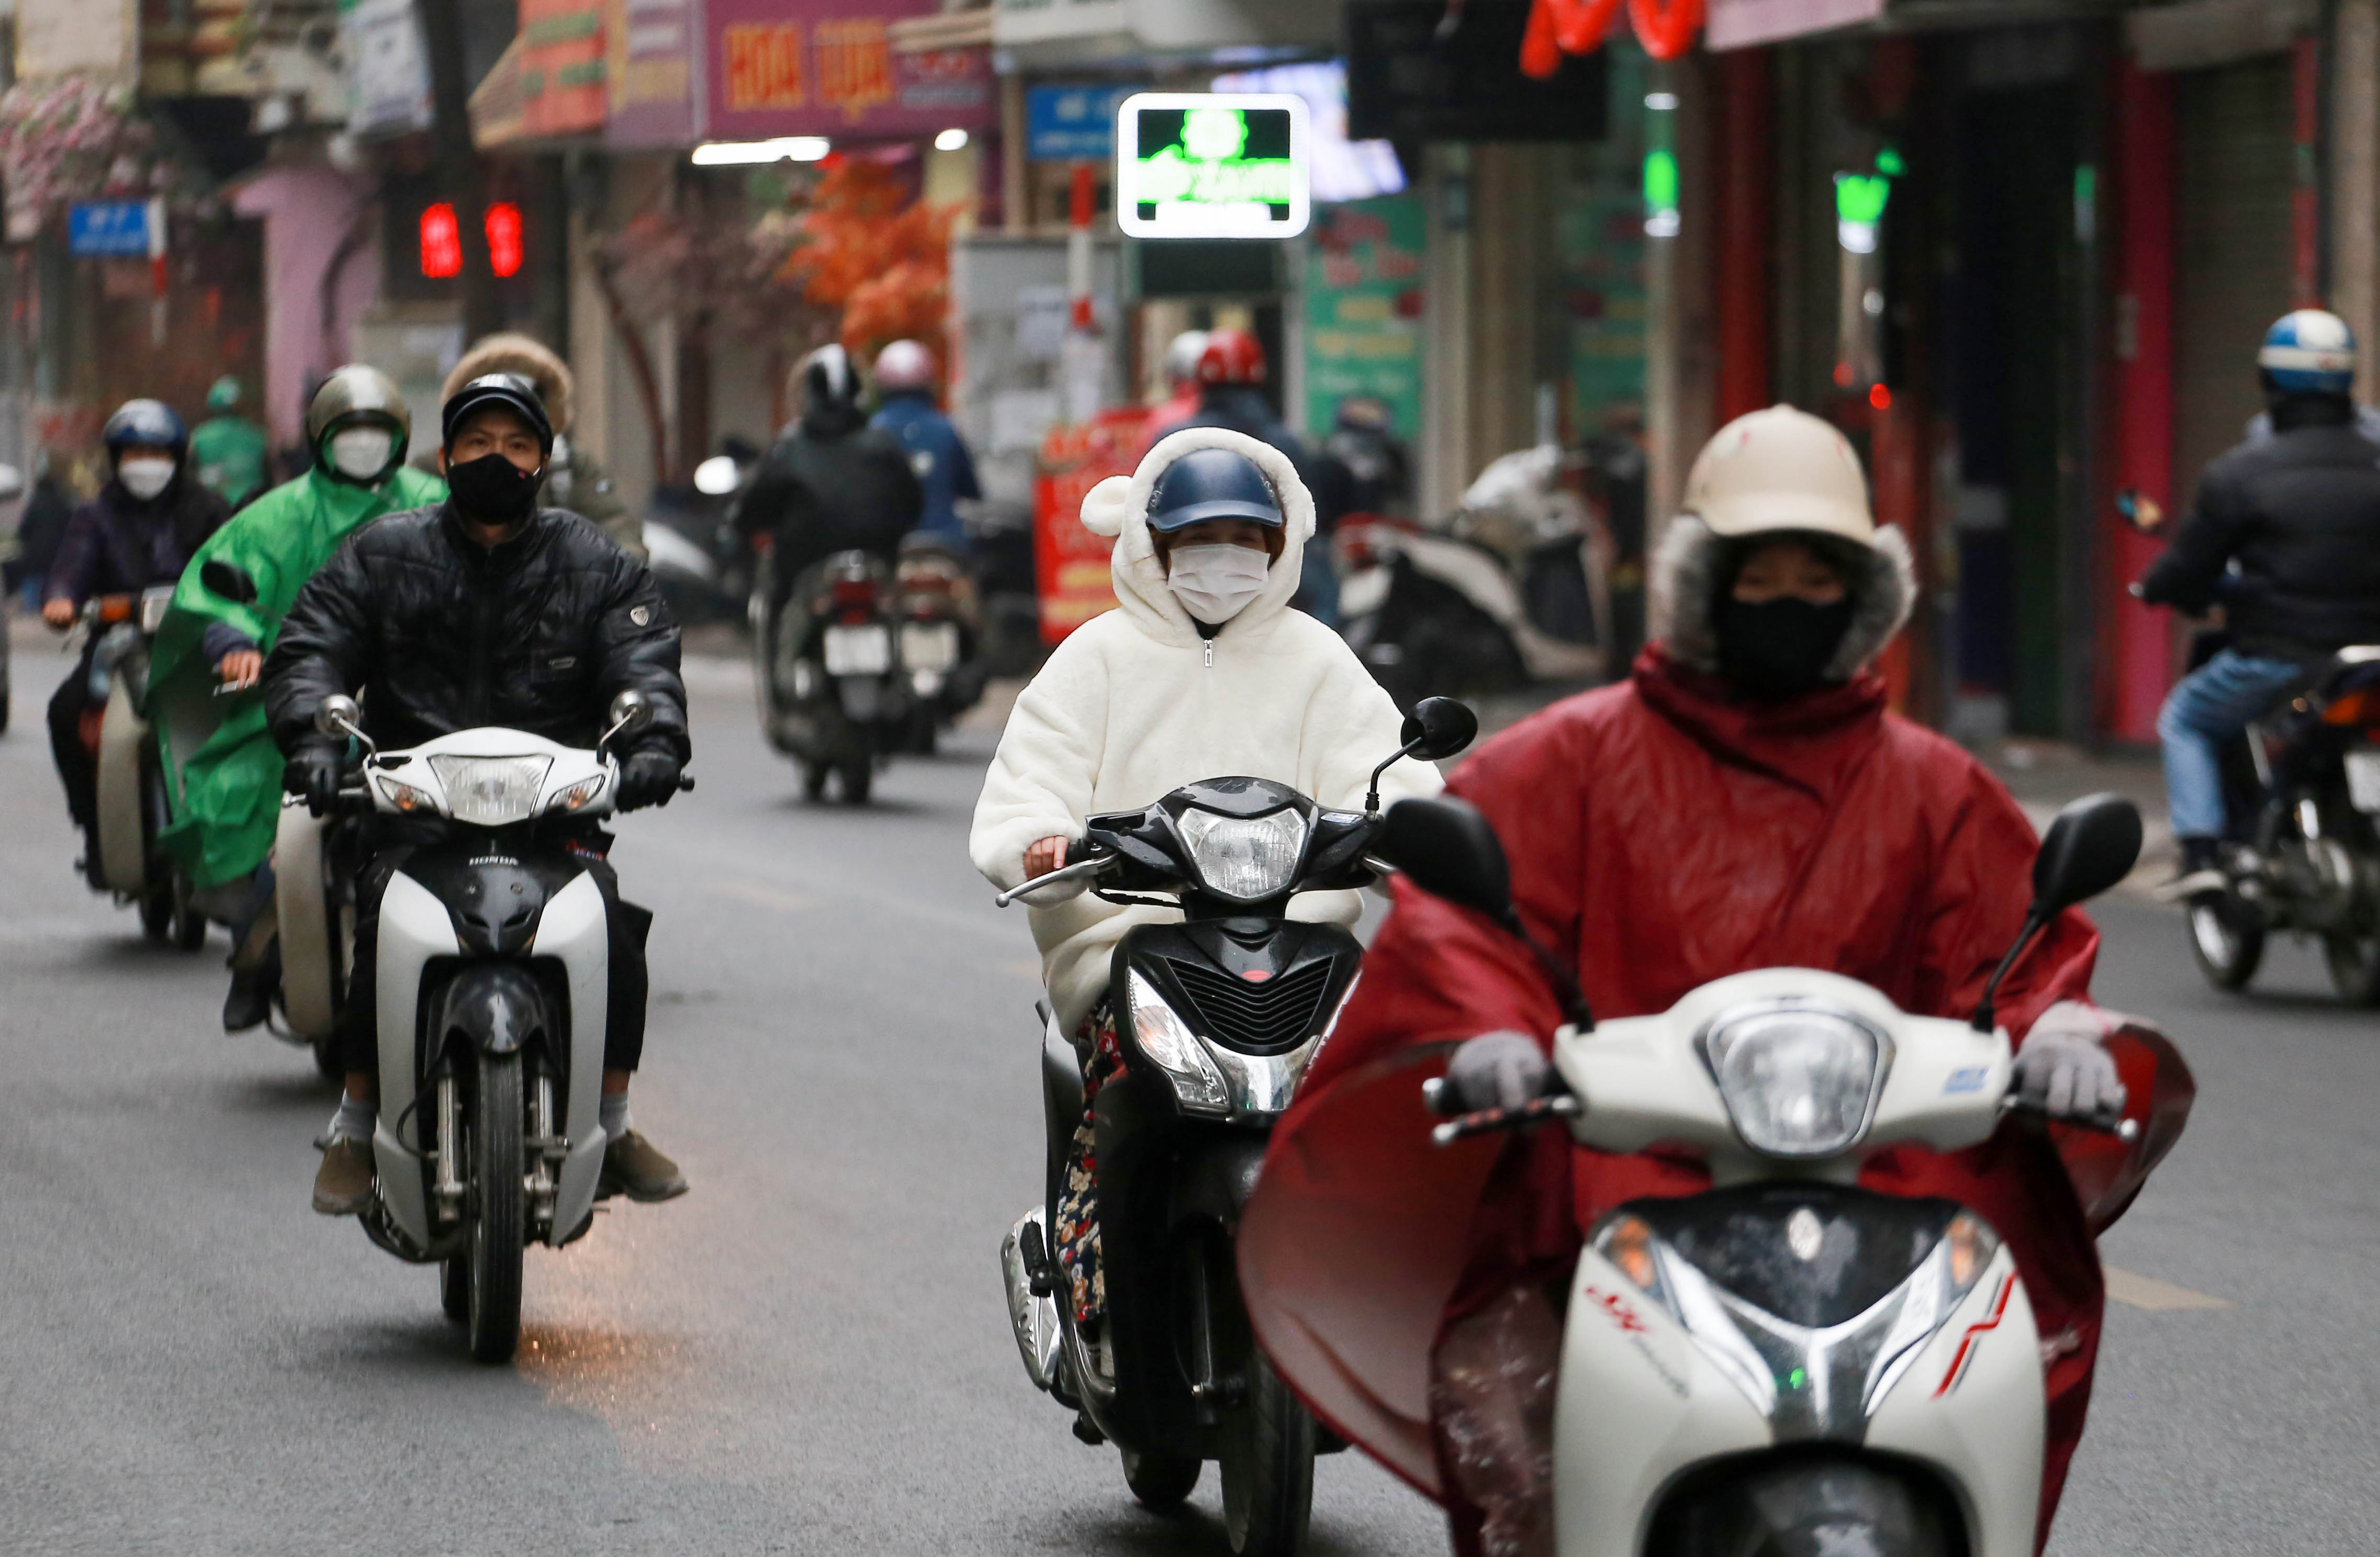 Northern Vietnam to experience cold weather this week